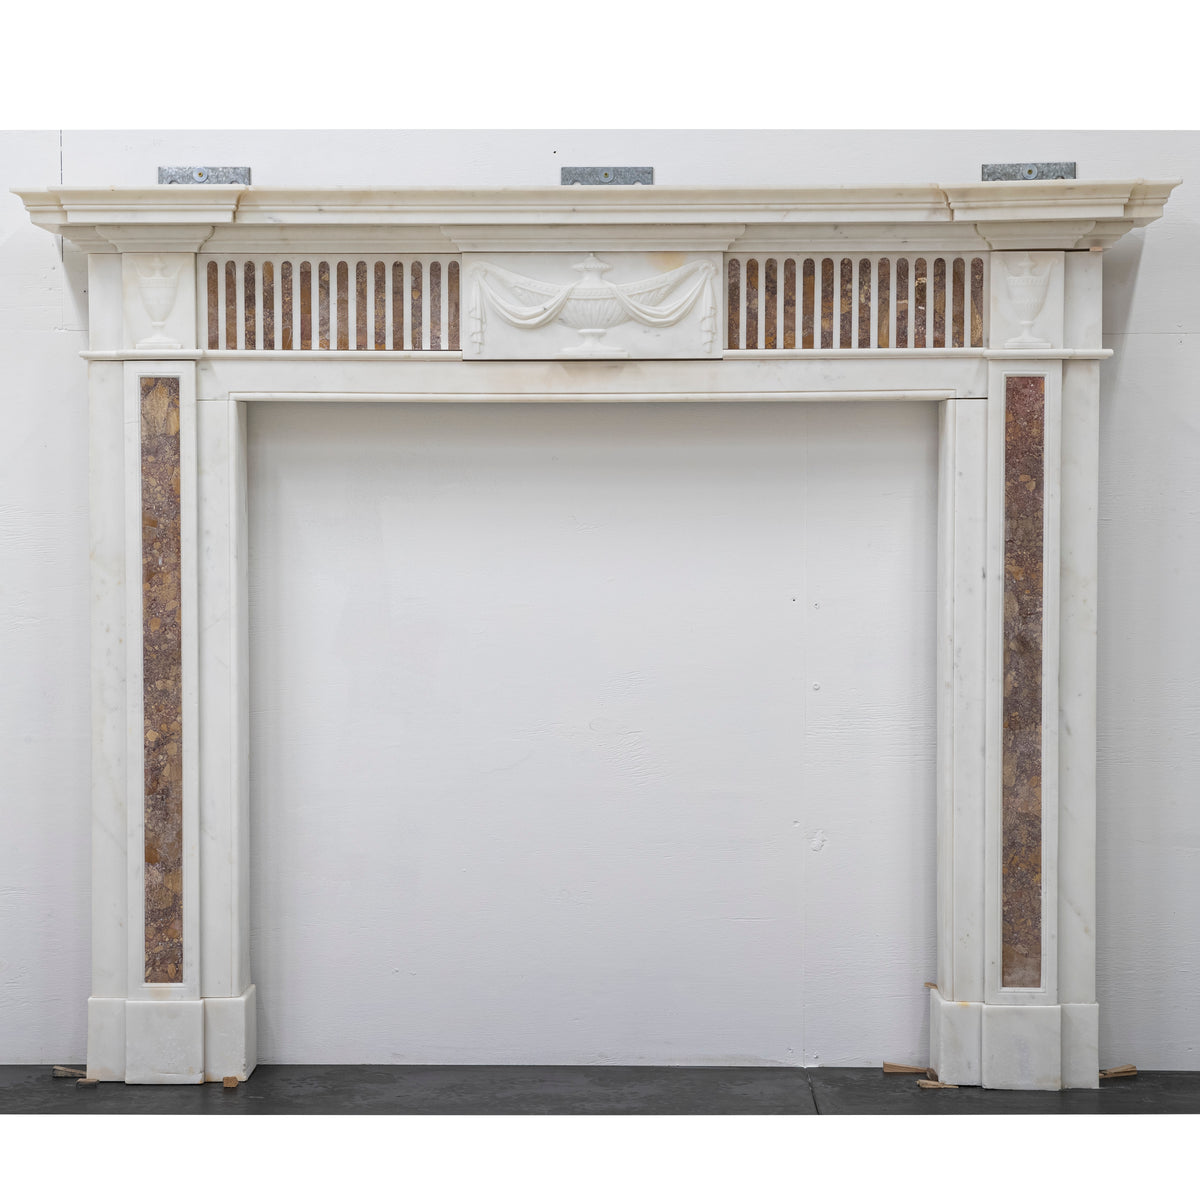 Marble Antique Late Georgian Statuary and Spanish Brocatello Inlay Chimneypiece c.1790 | The Architectural Forum